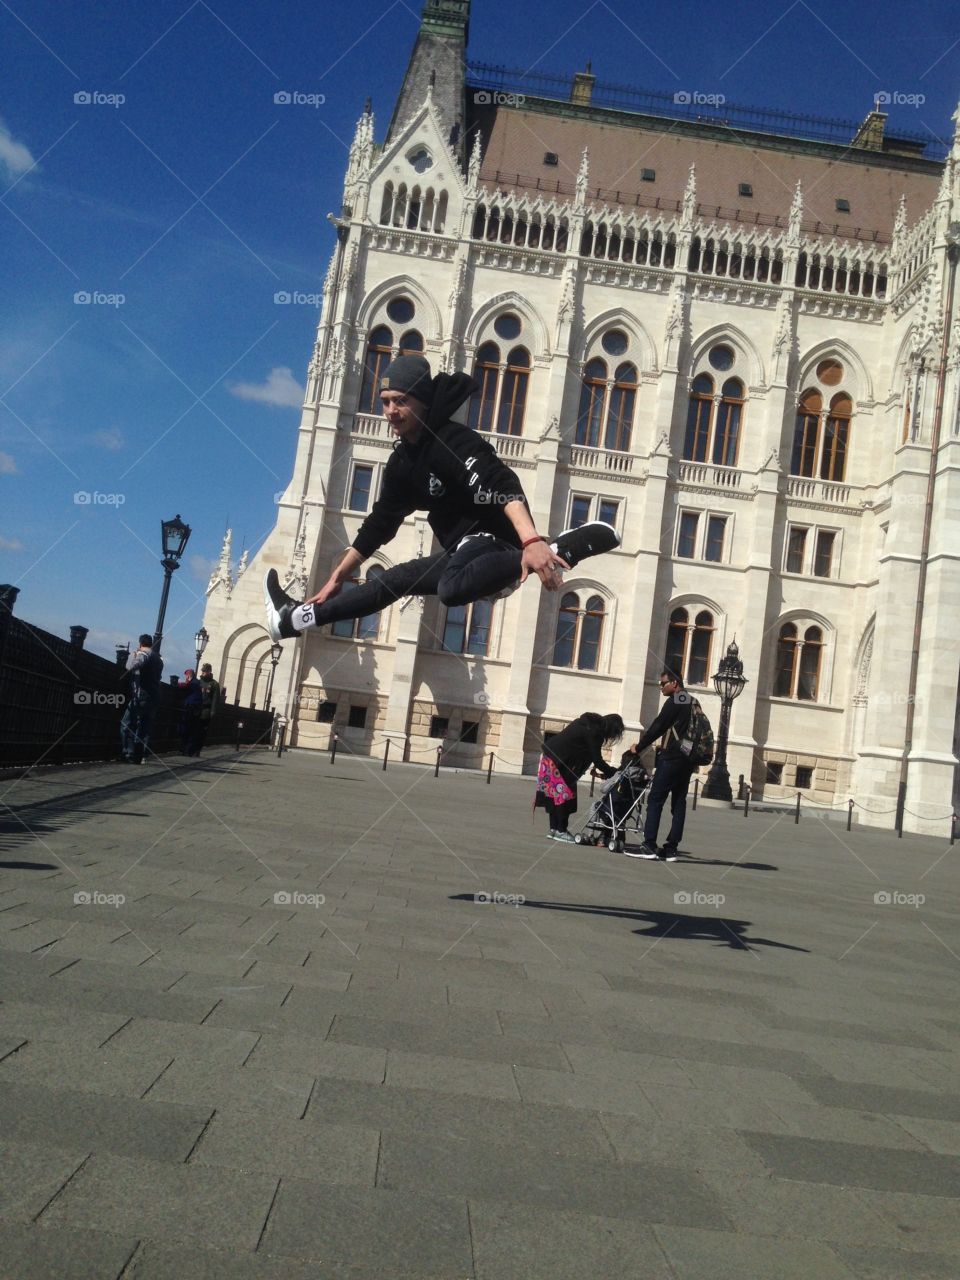 This is me in Budapest
Budapest is awesome
I like to fly